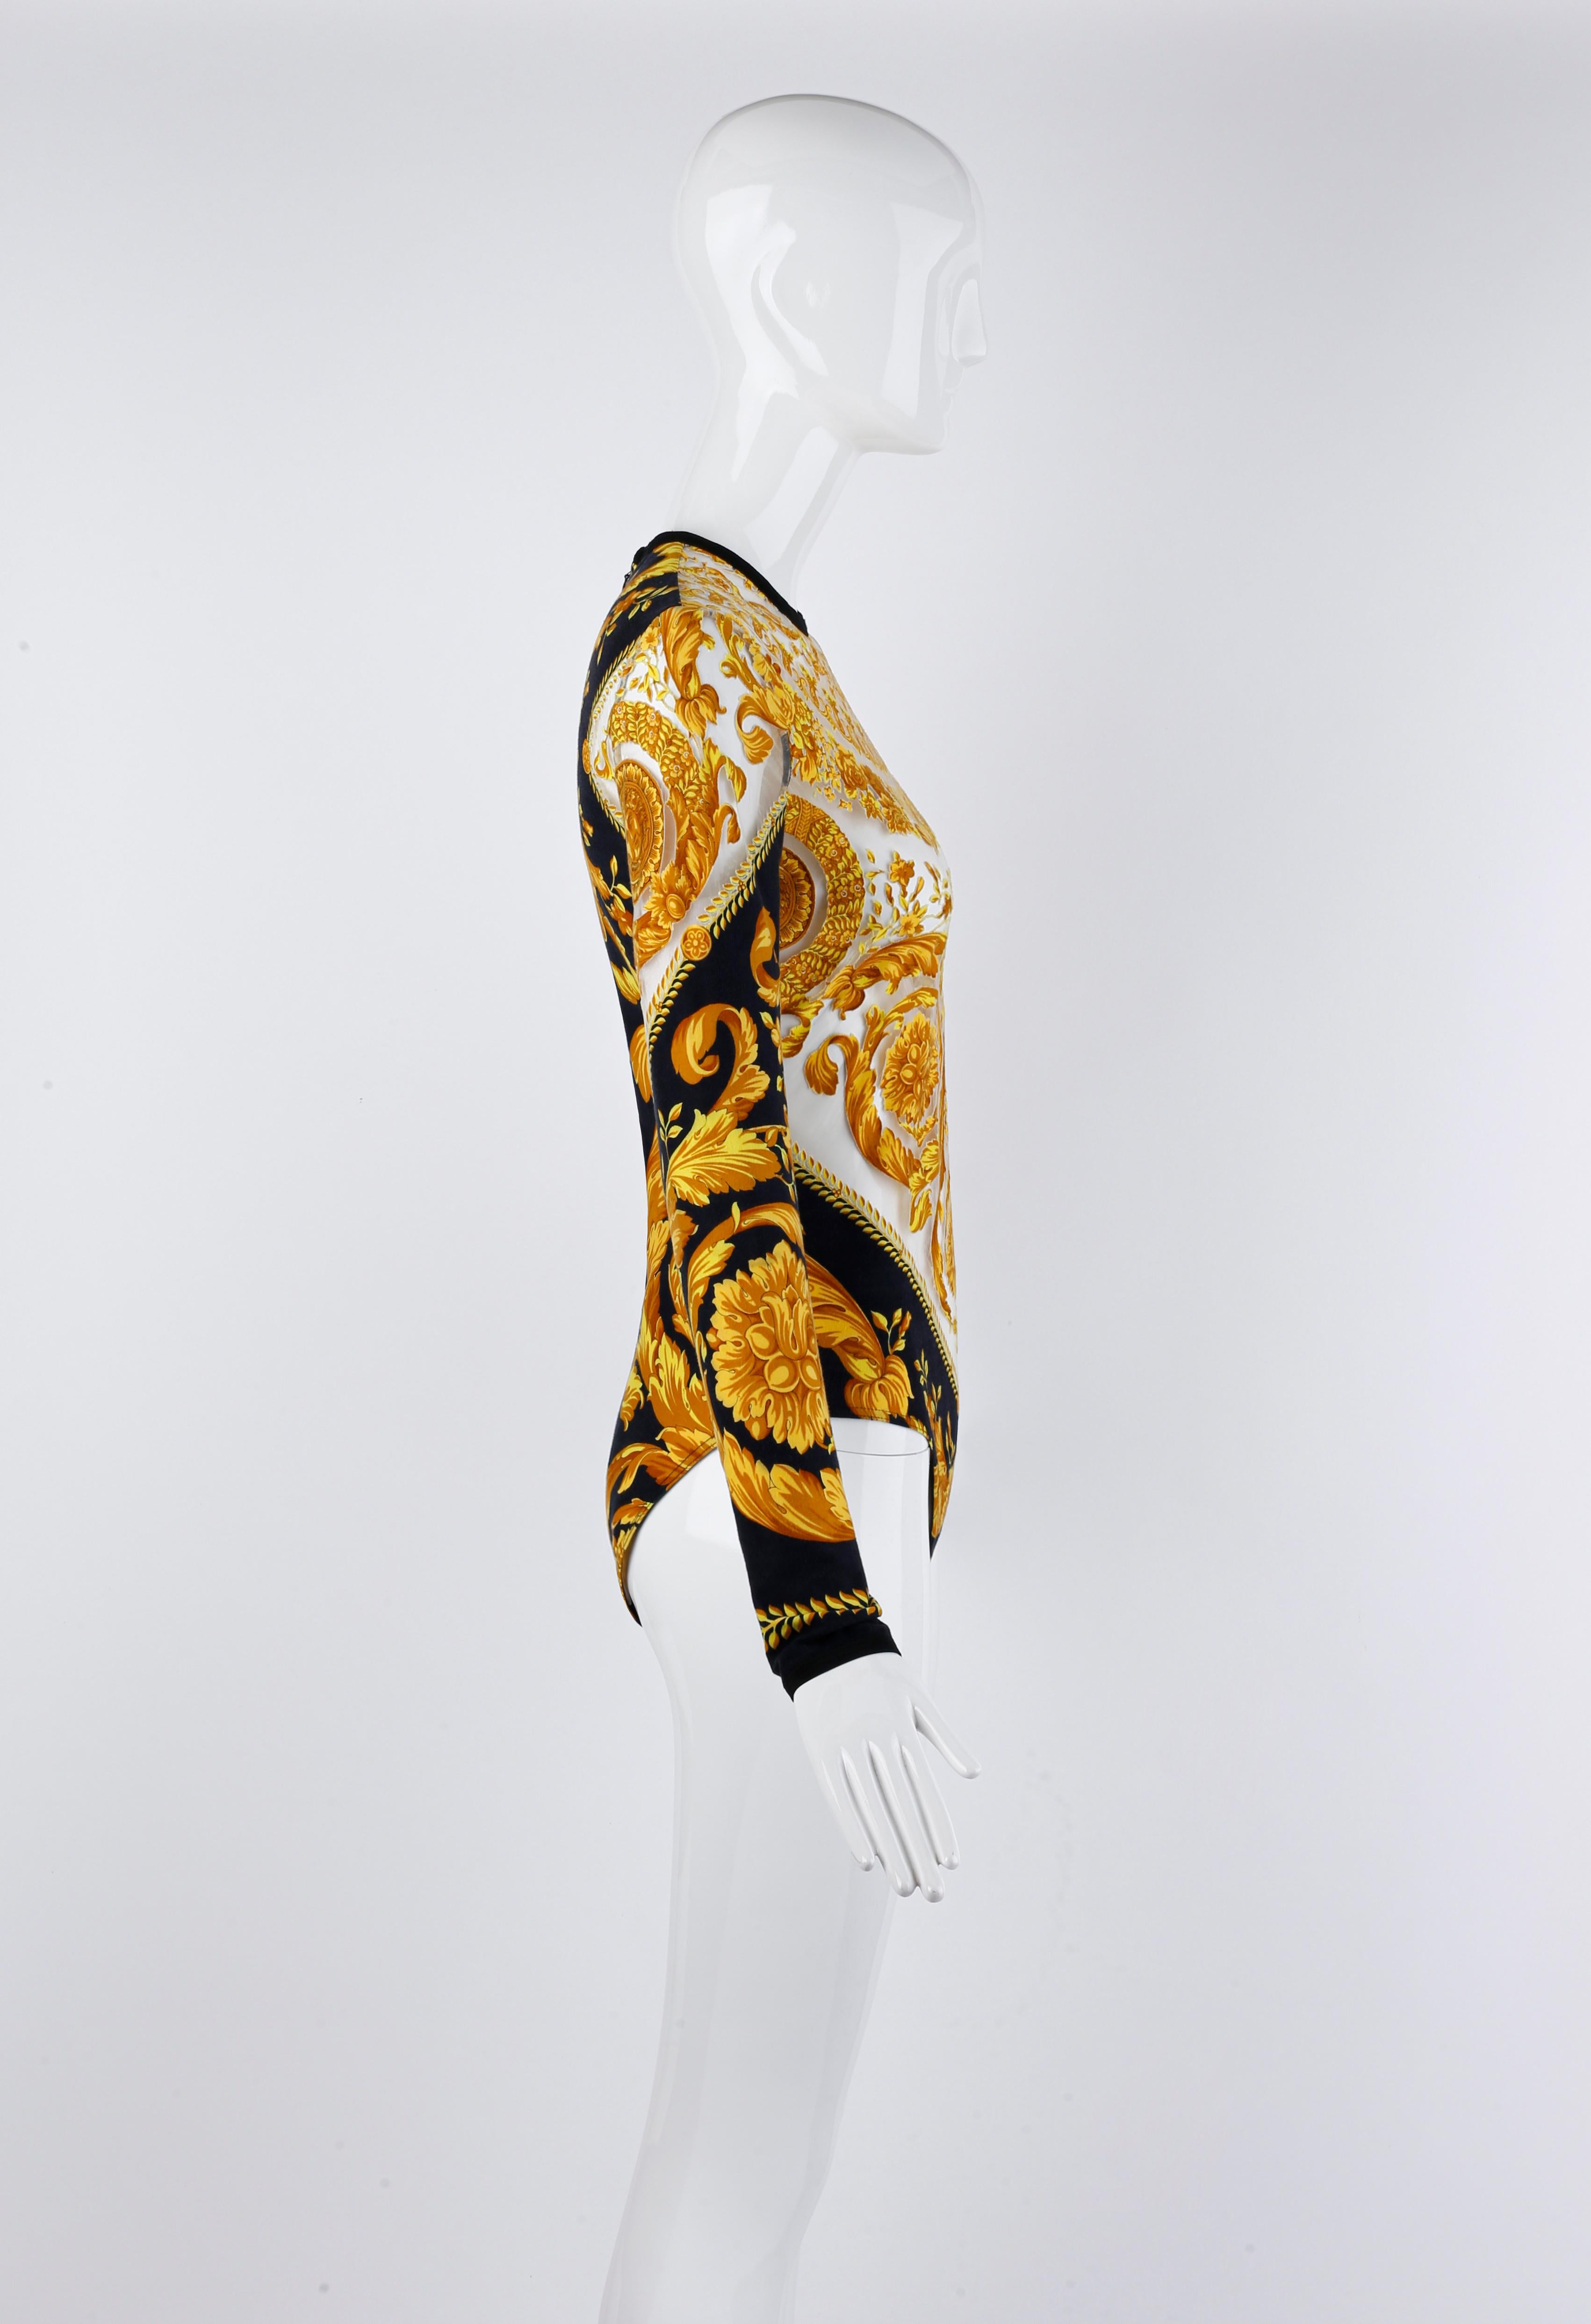 Gianni Versace S/S 1994 Signature Baroque Print Sheer Mesh Illusion Bodysuit  In Good Condition For Sale In Chicago, IL